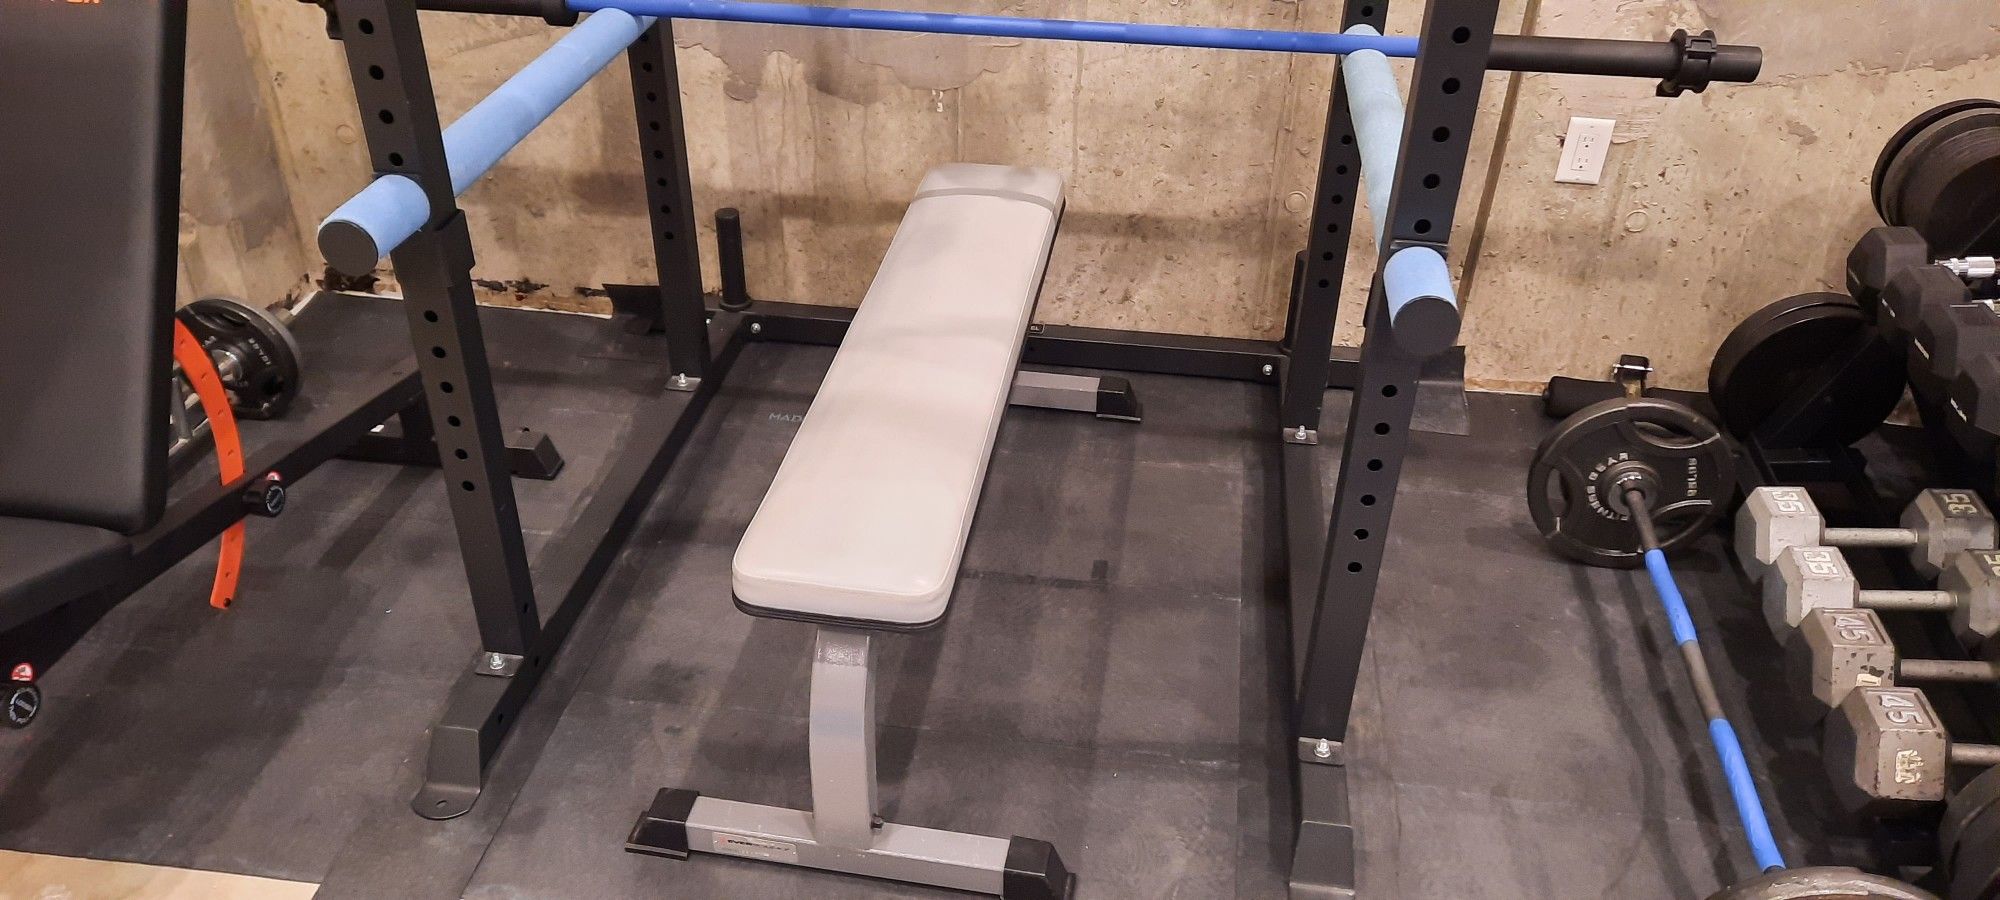 Exercise Flat Bench Press 1500lb Capacity - Gym Fitness Club Equipment